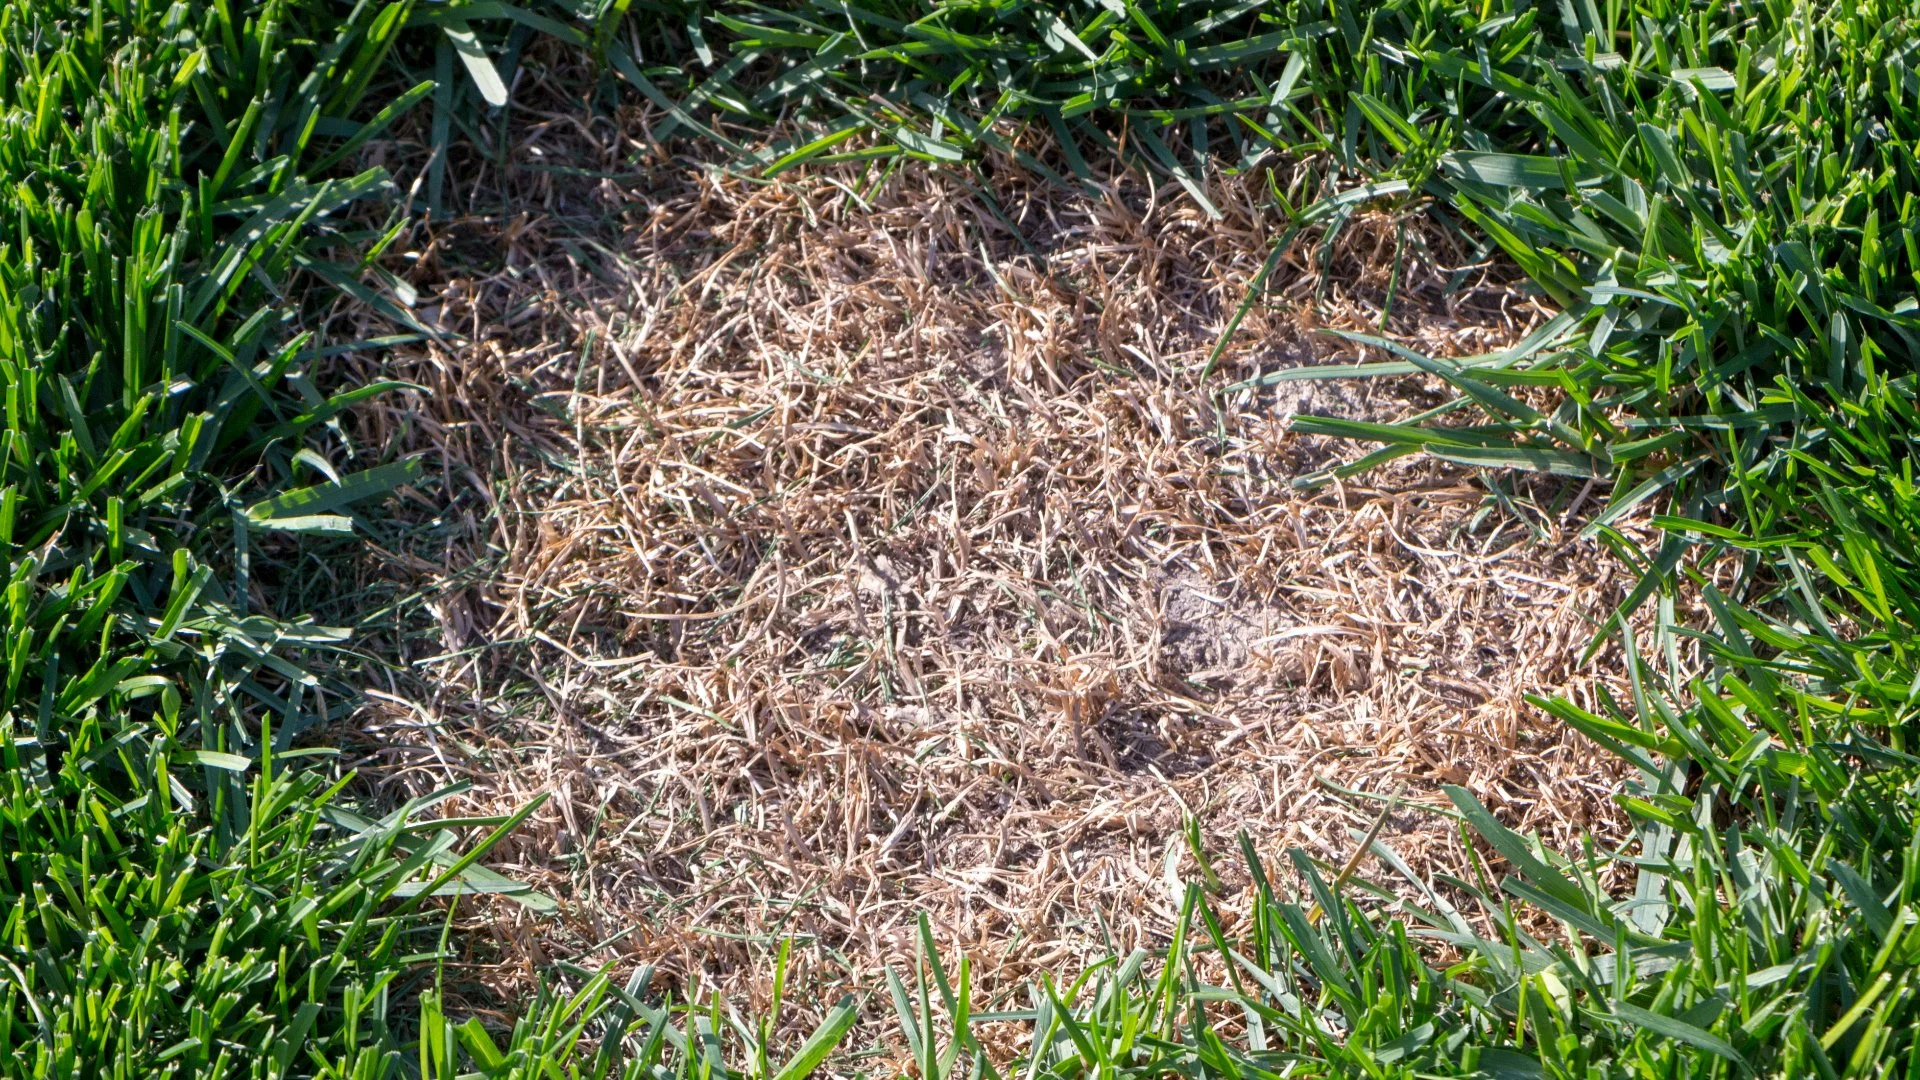 Dollar Spot - A Lawn Disease You Should Keep an Eye Out For